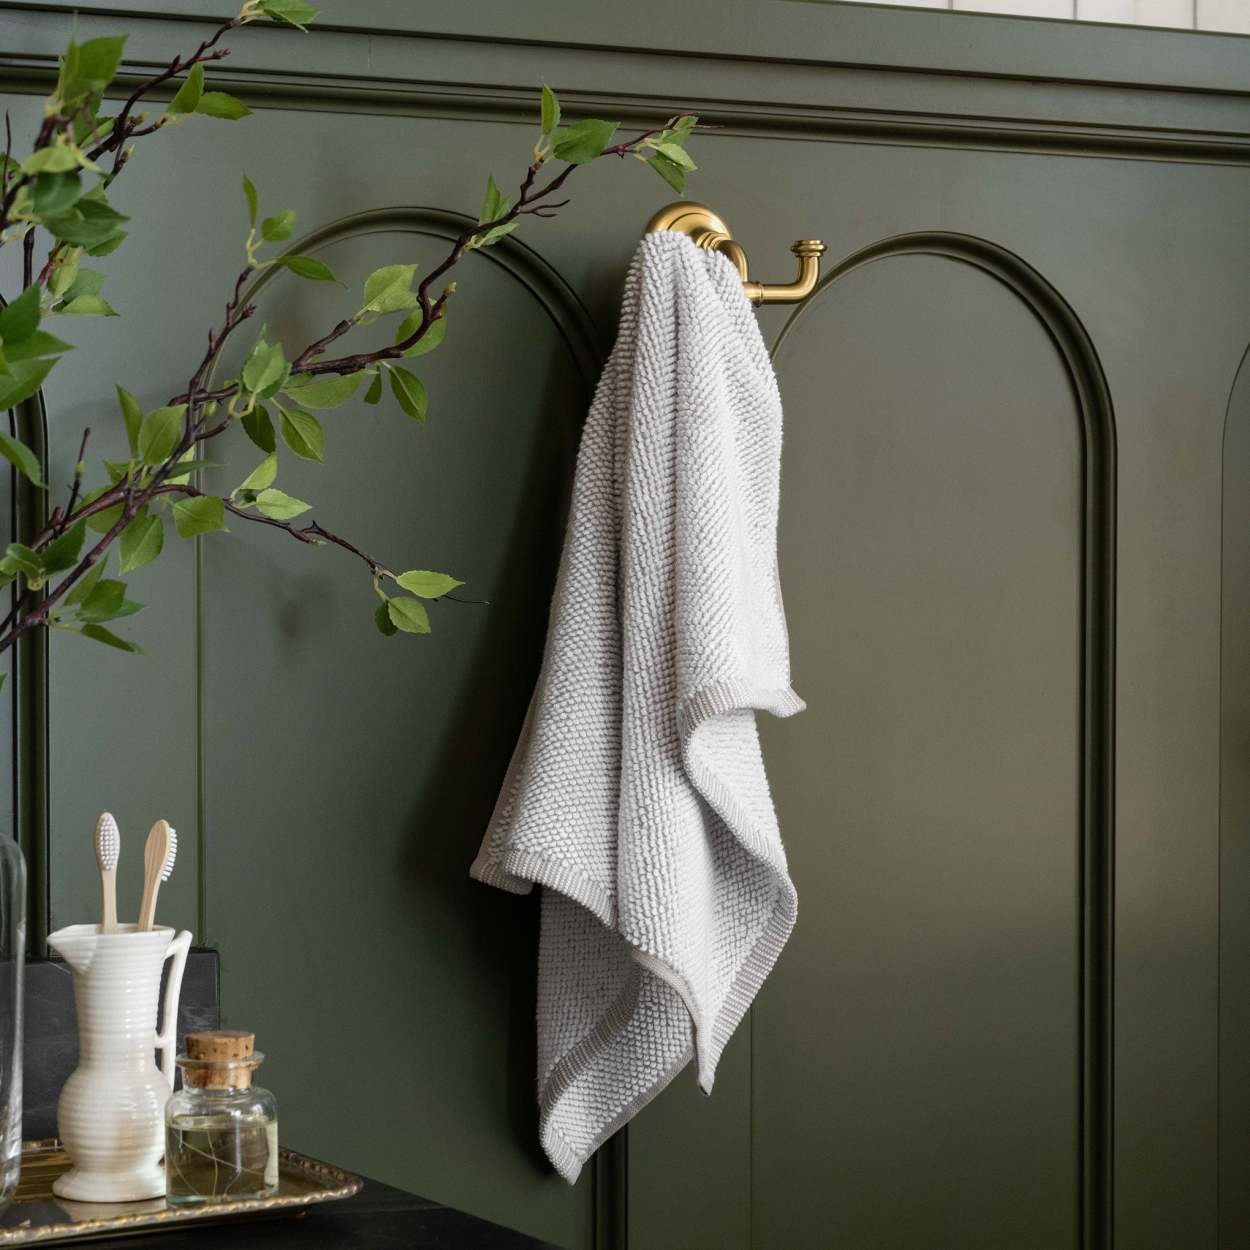 Rustic Napa Linen Kitchen Towel - Olive and Linen